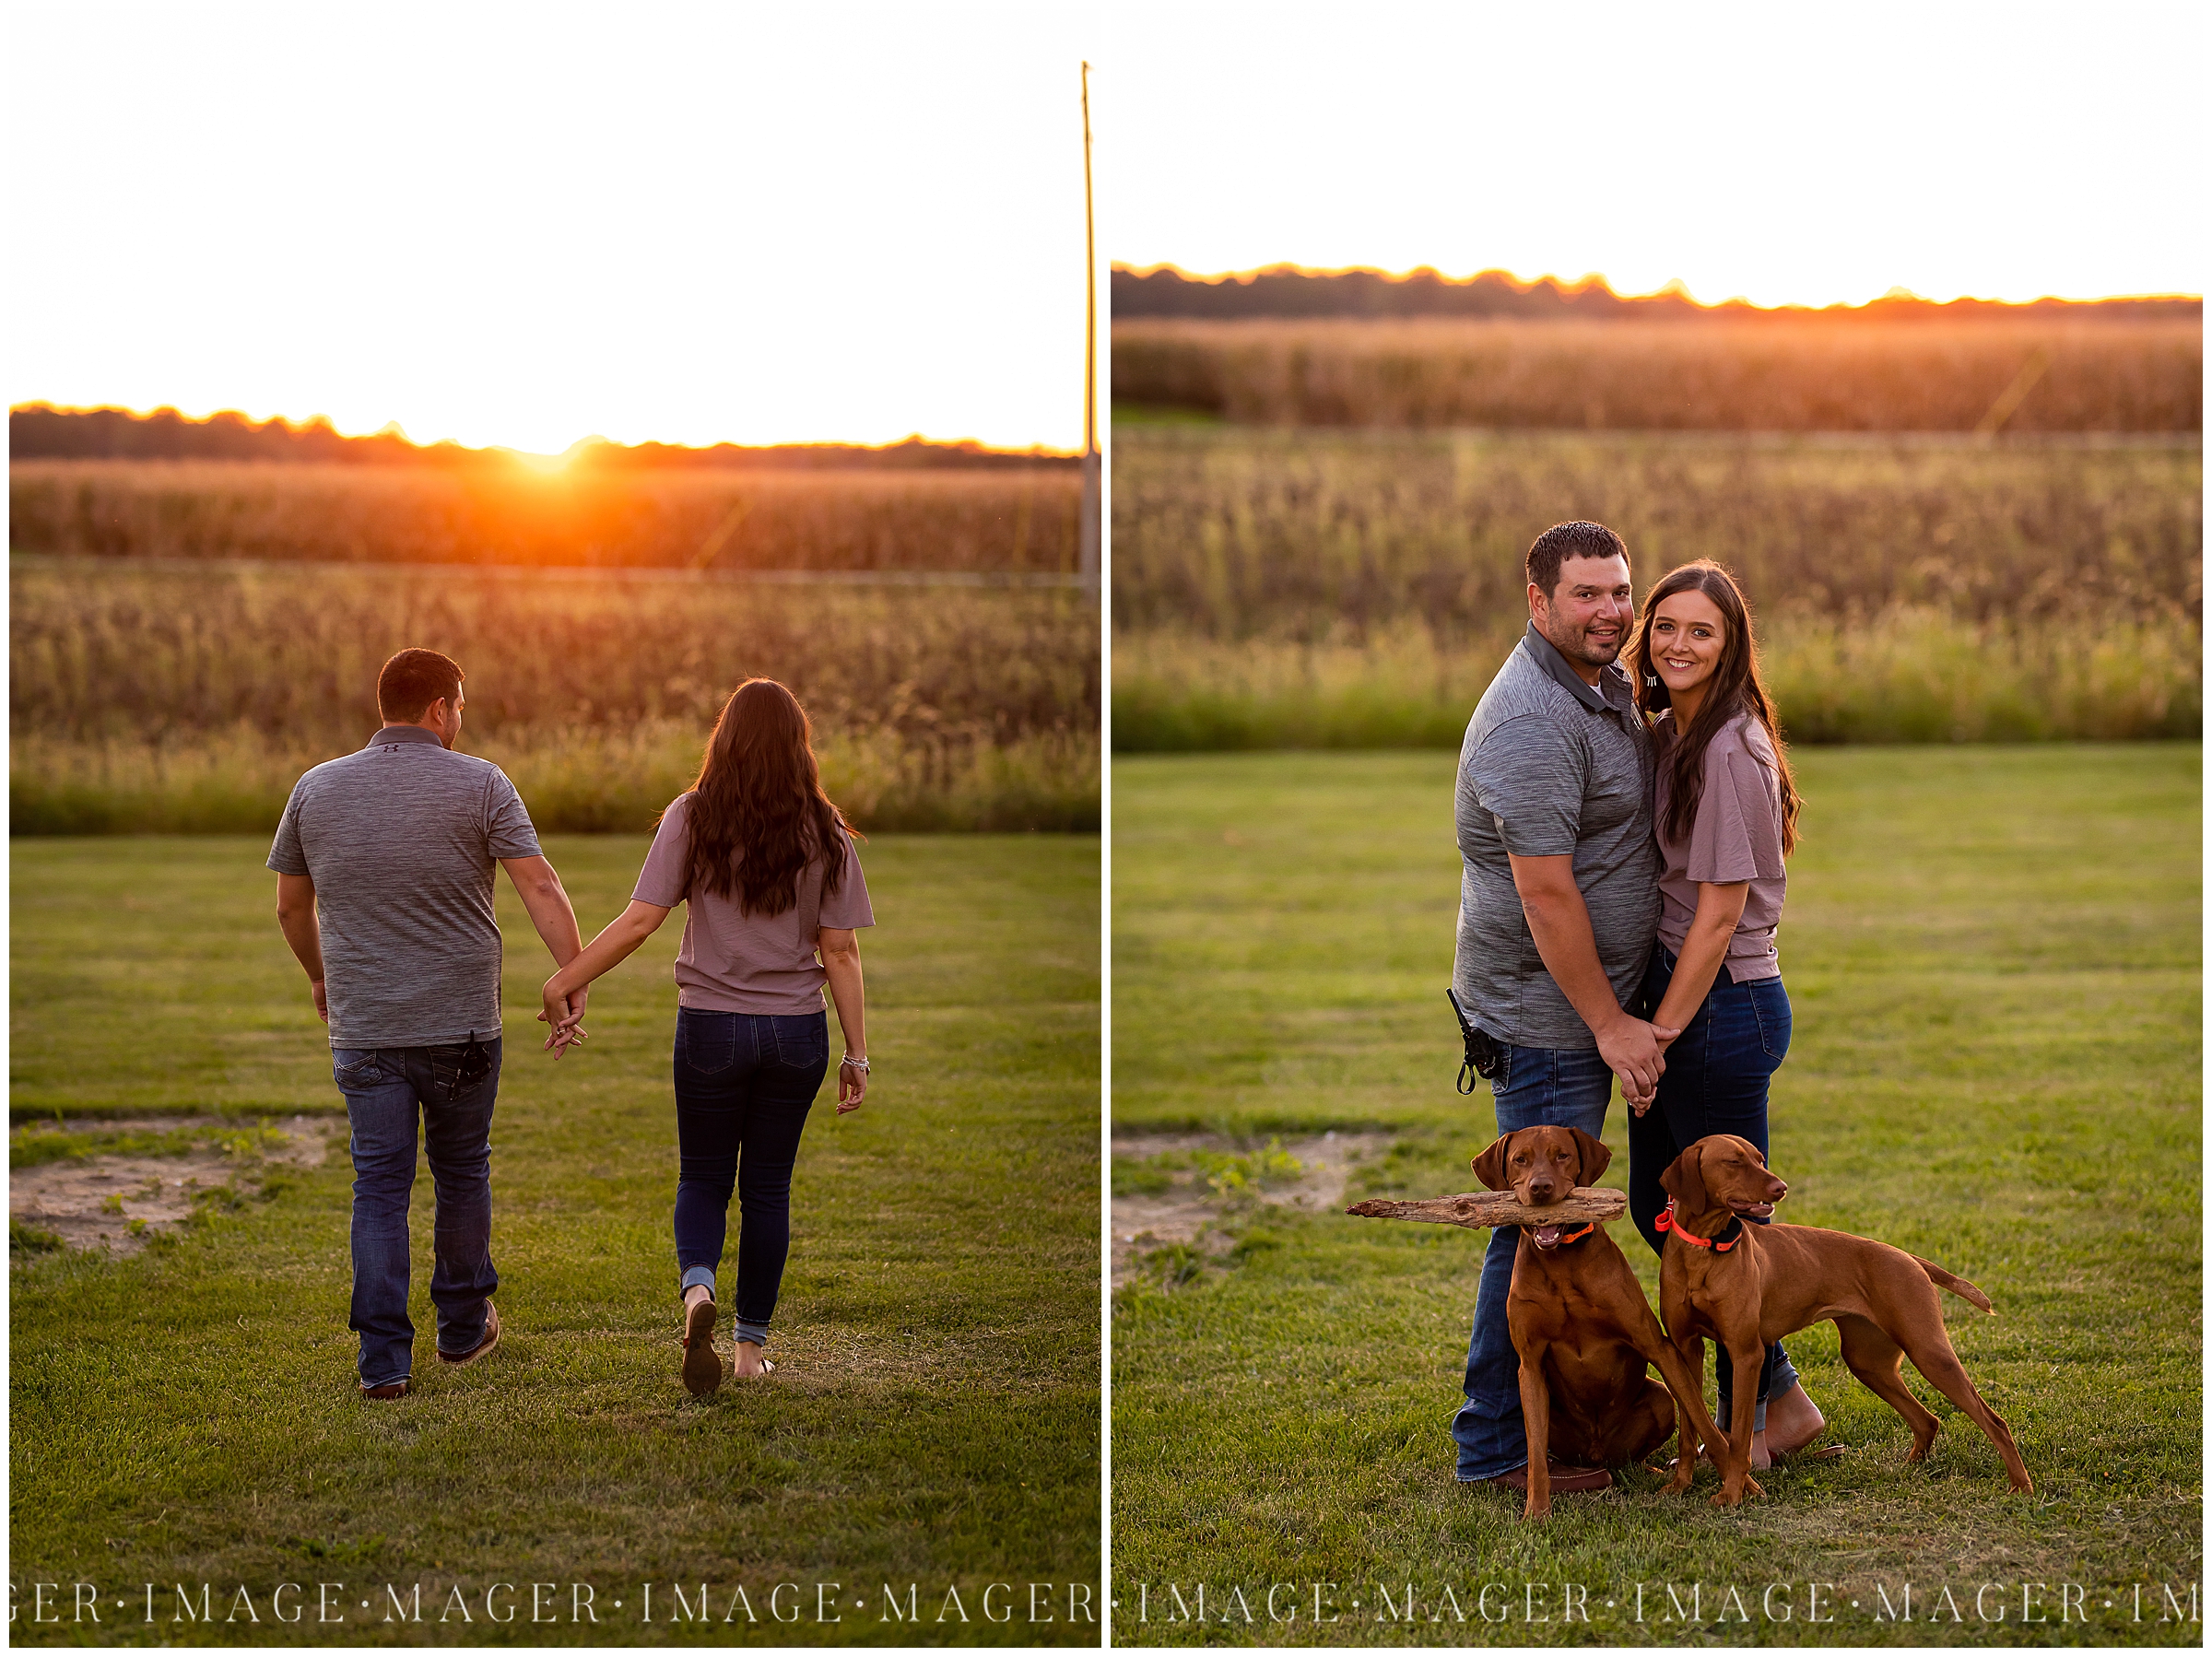 field-sunset-enagement-session-central-illinois-grass-fence-dogs